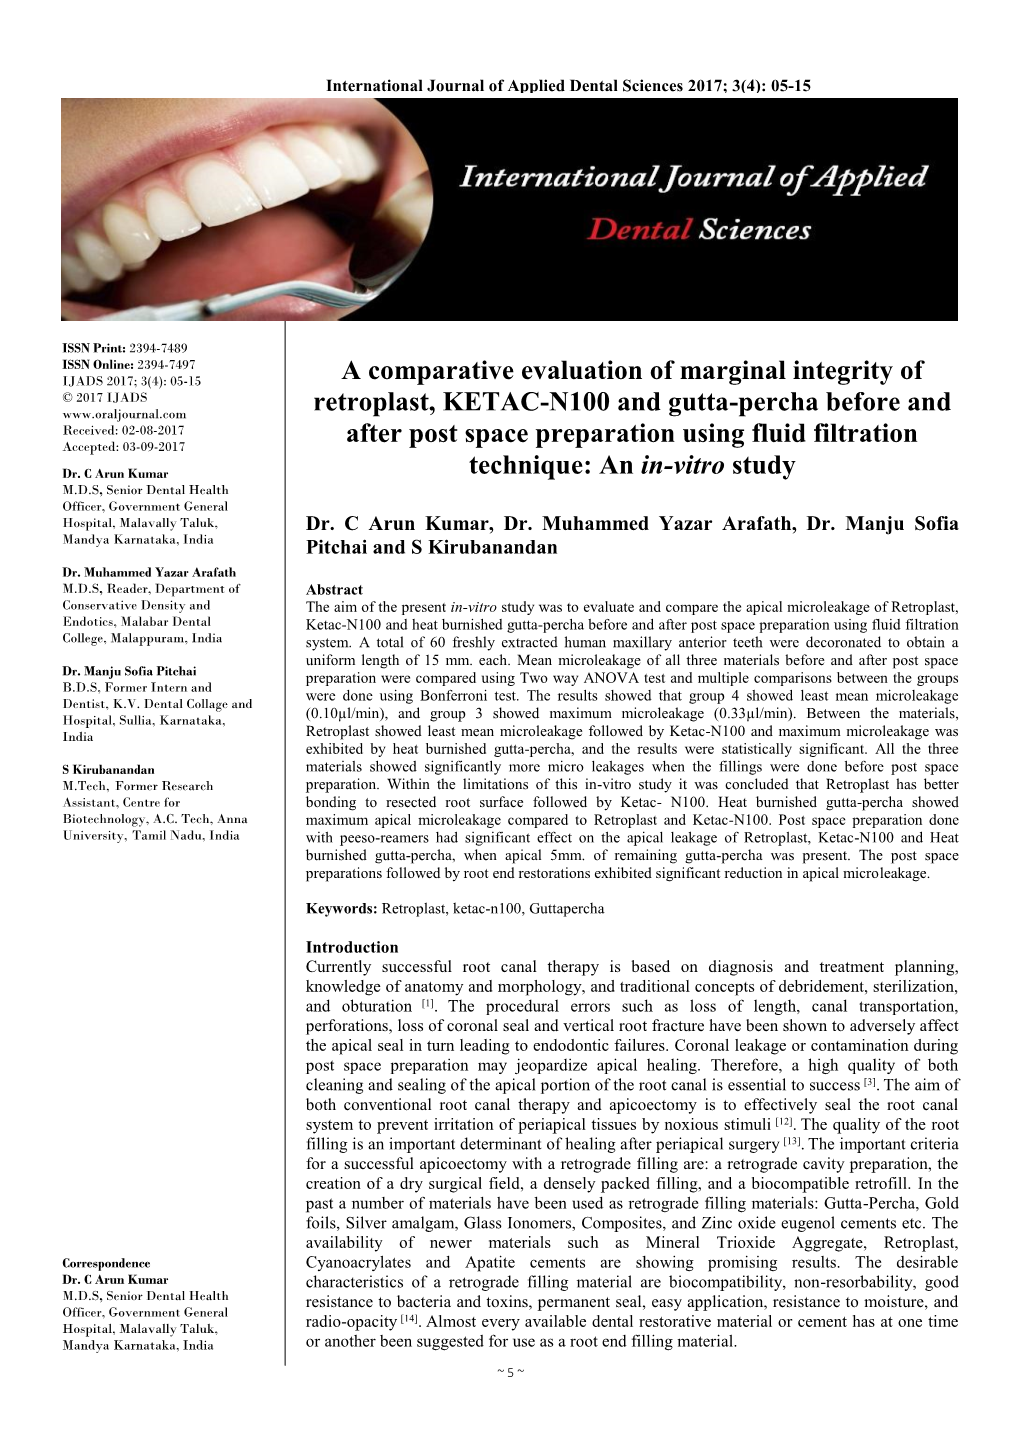 A Comparative Evaluation of Marginal Integrity of Retroplast, KETAC-N100 and Gutta-Percha Before and After Post Space Preparatio